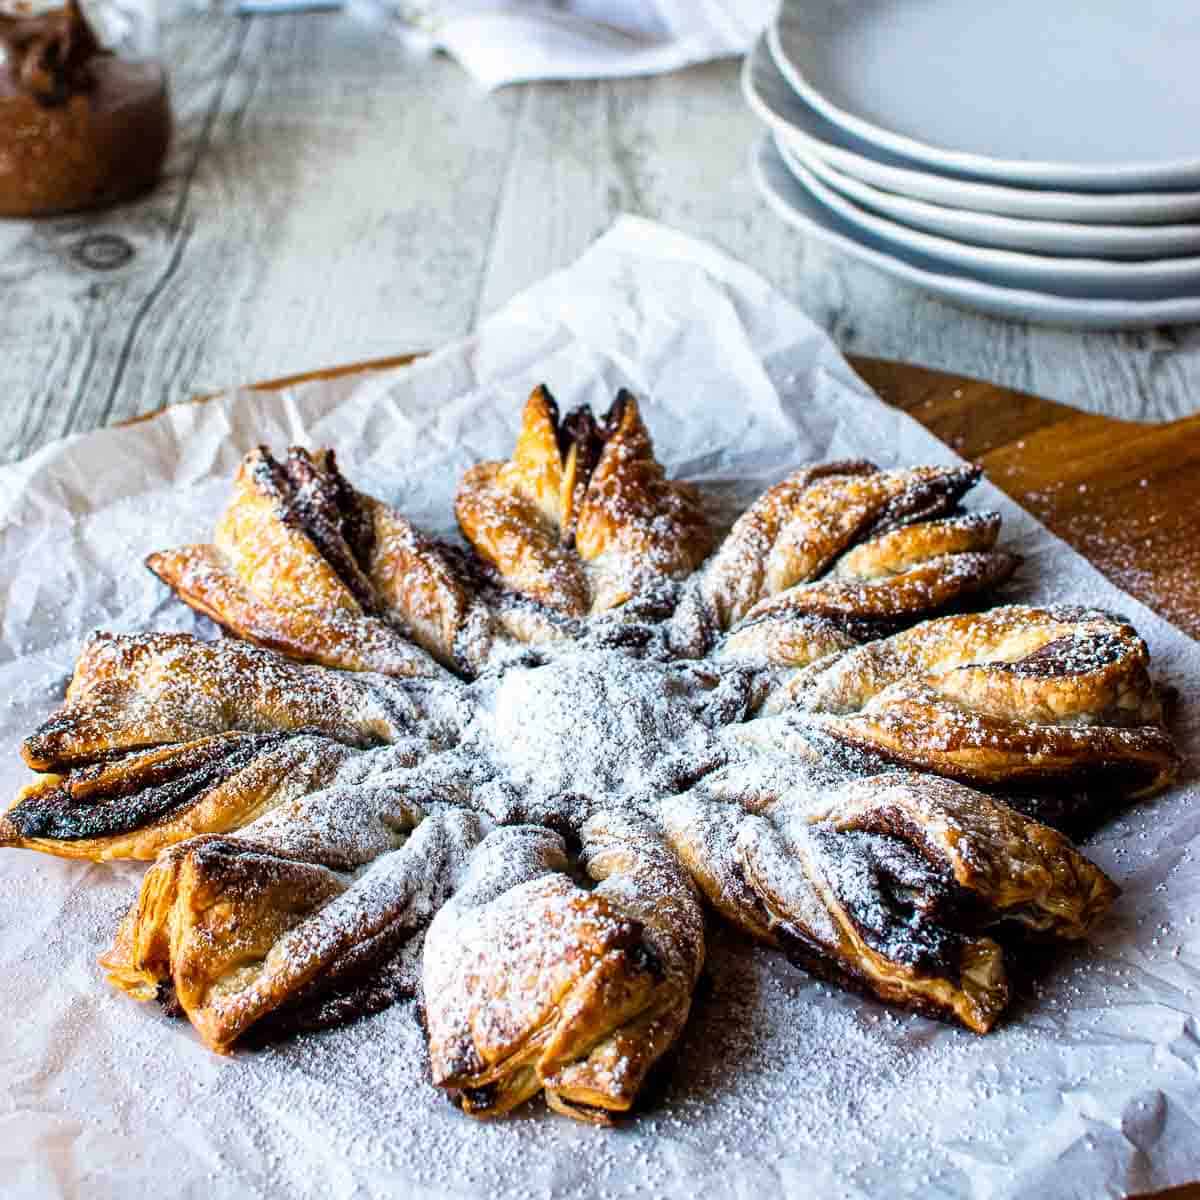 Star shaped pastry with dusting of powdered sugar on white paper.